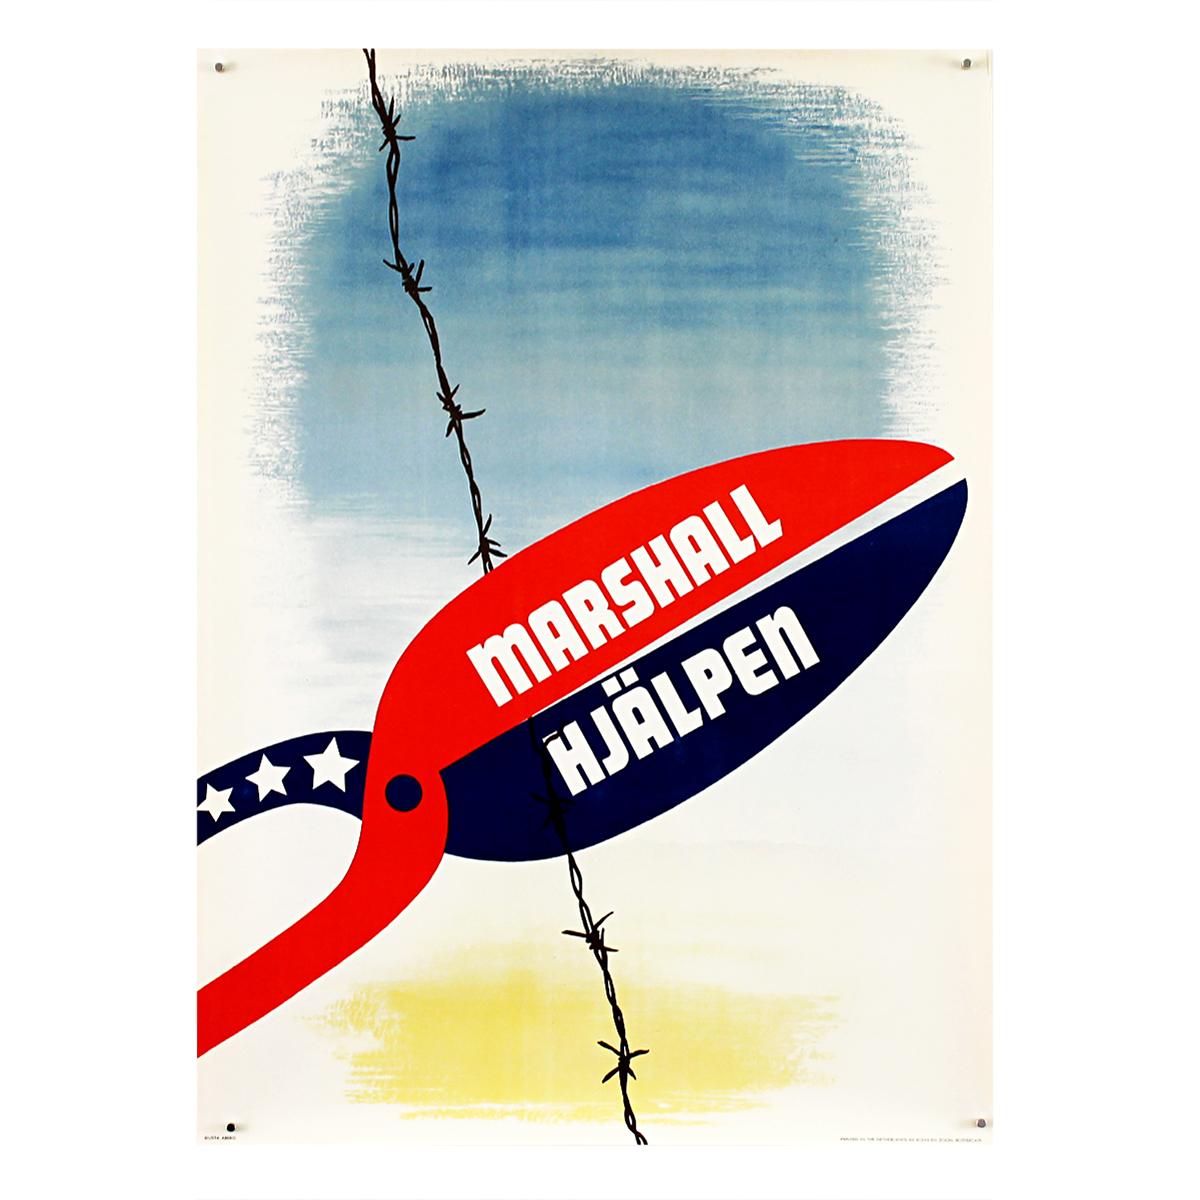 Paper 25 Original Marshall Plan Posters, a Complete Collection of the Contest Winners